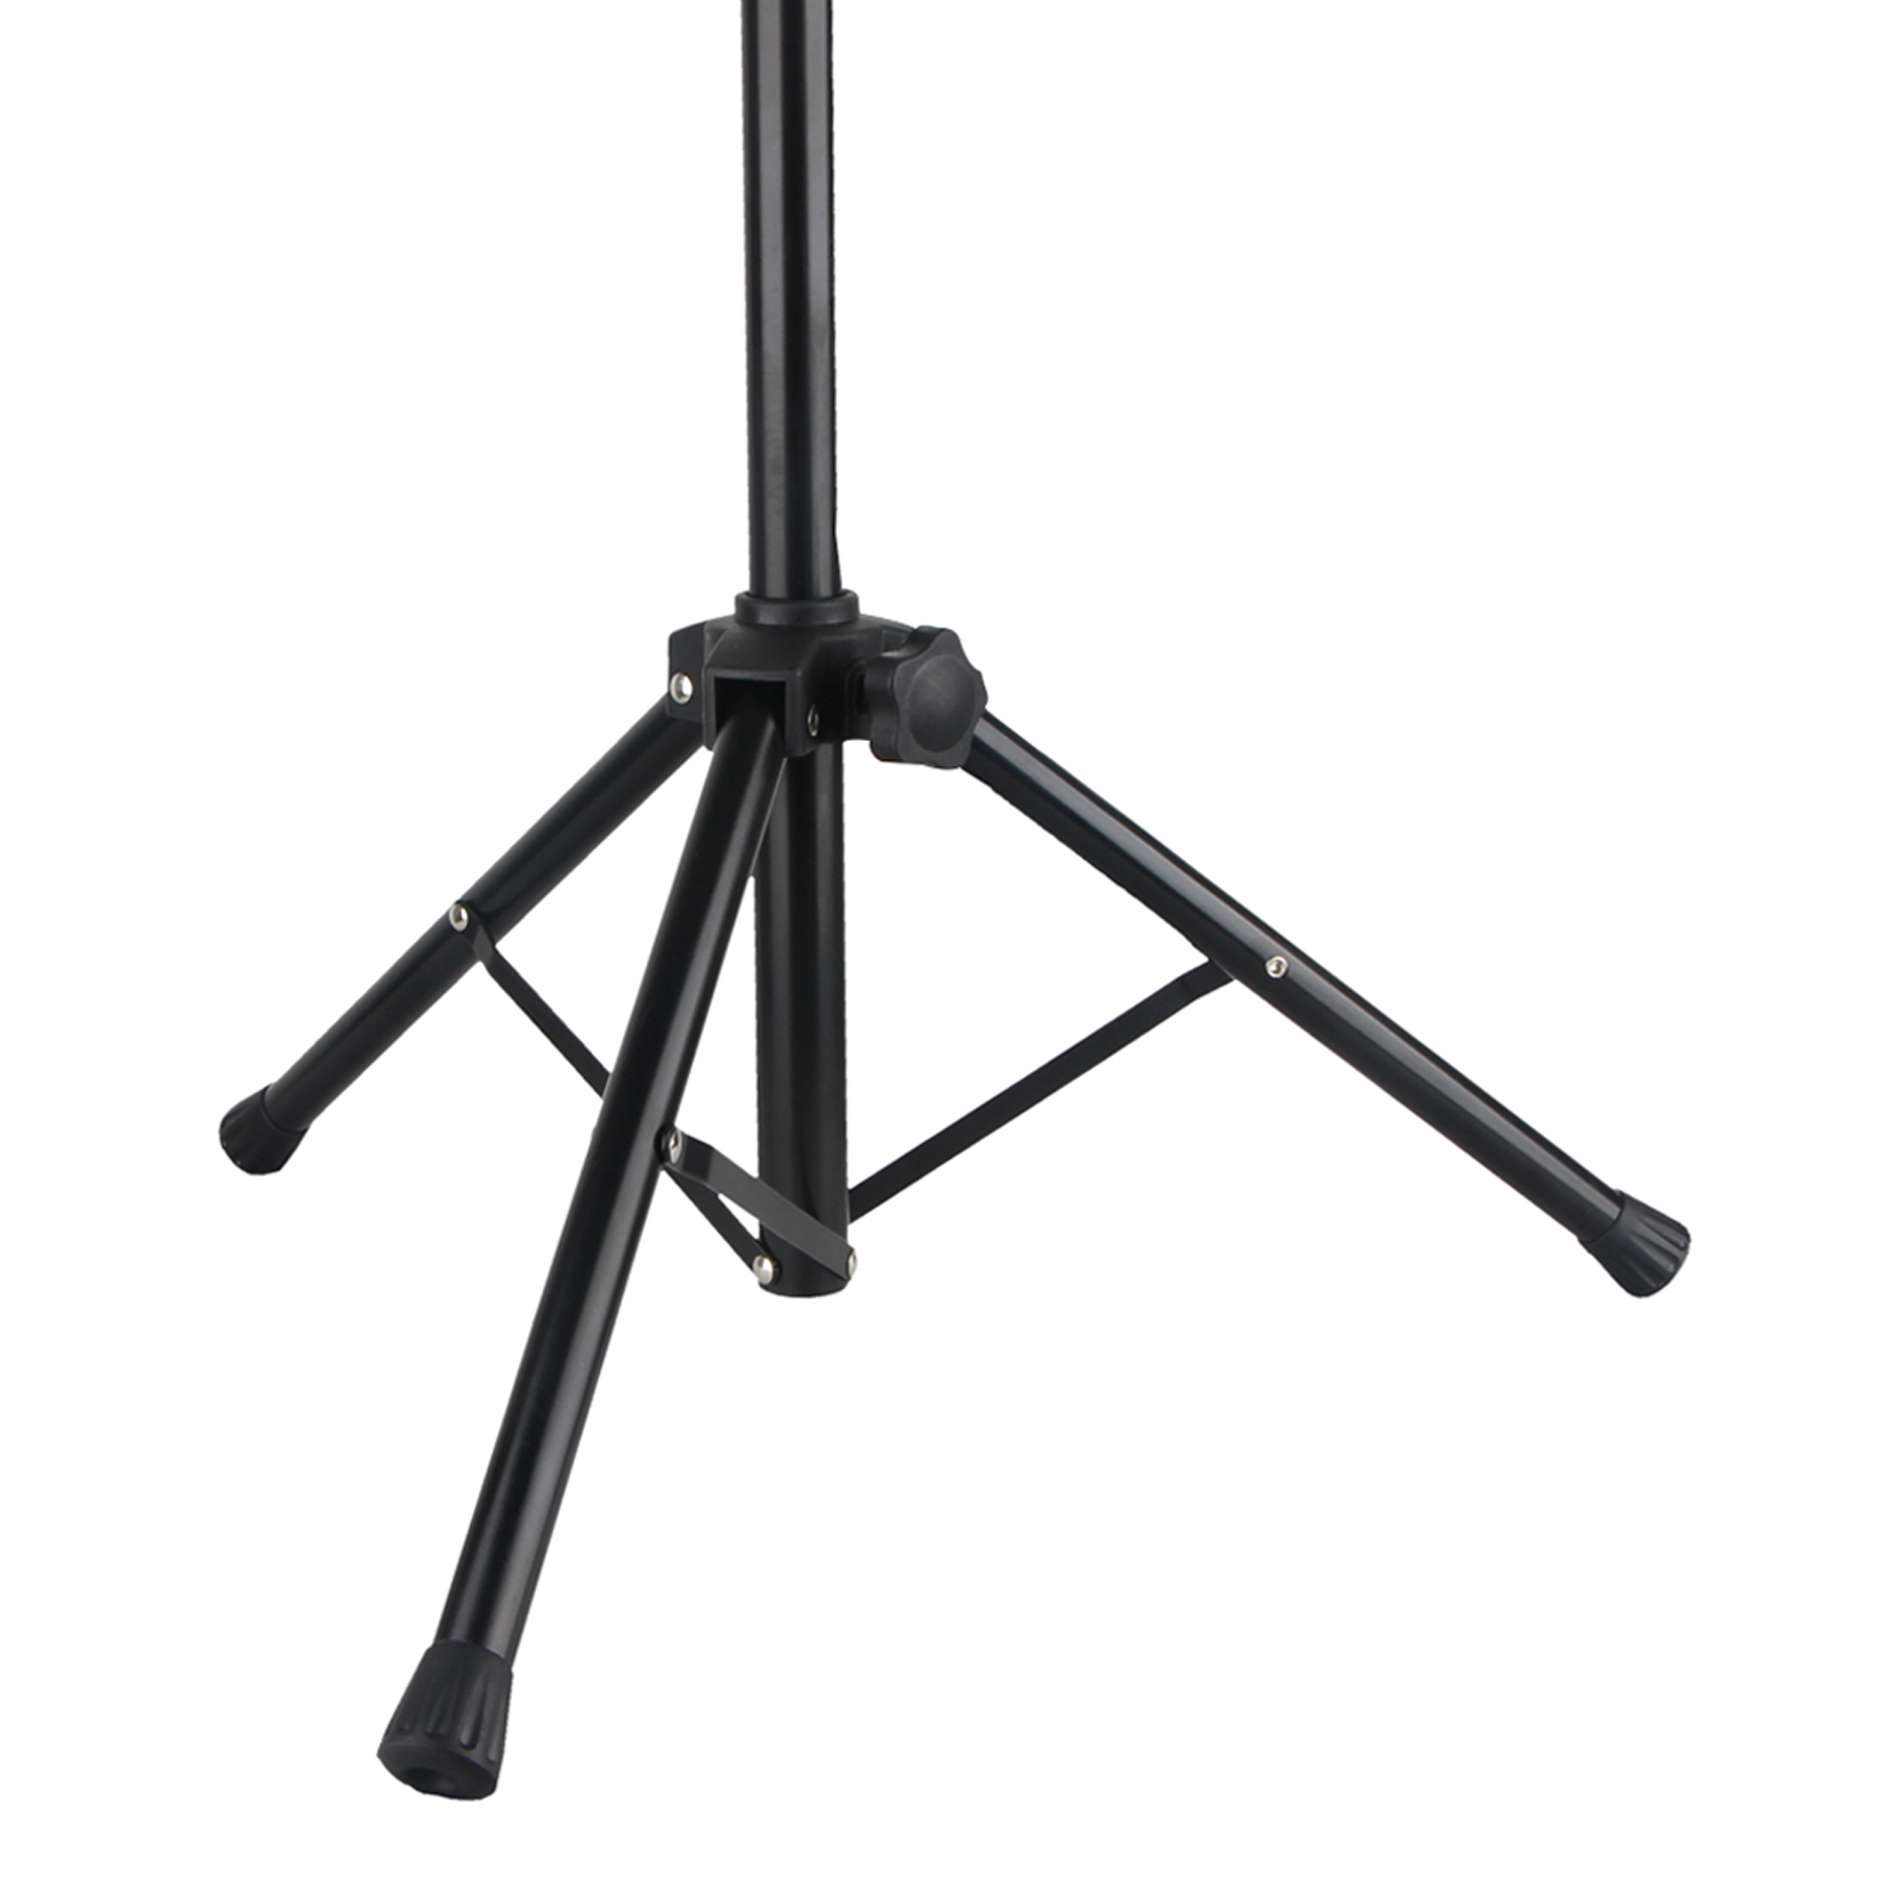 Power Pf 32 Pied Pour Filtre Antibruit - Microphone stand - Variation 1